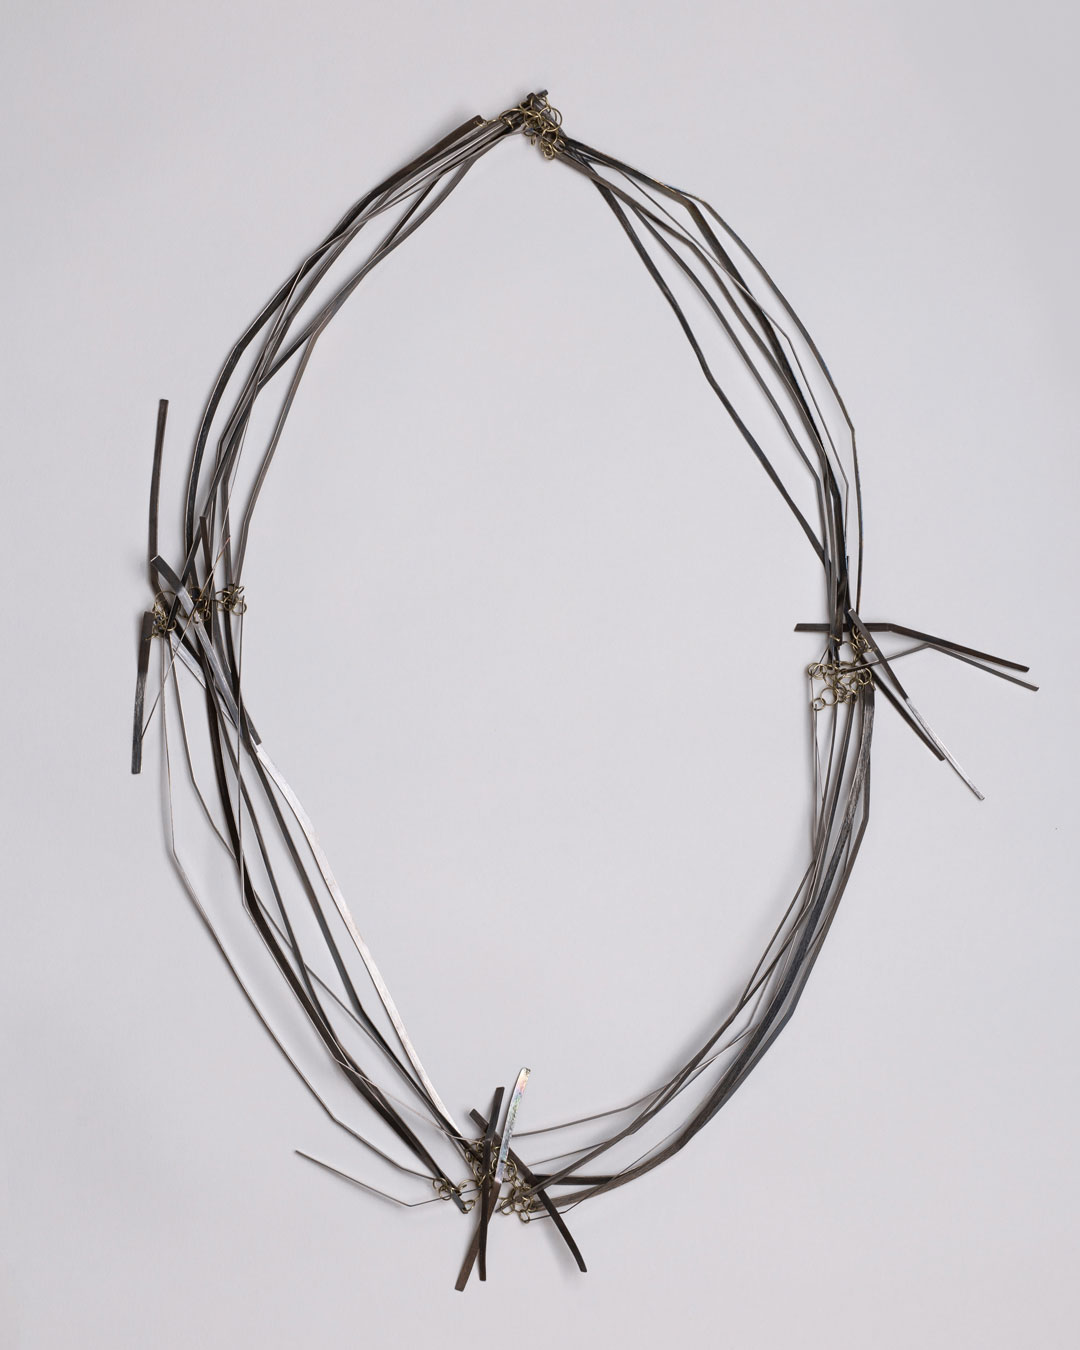 Antje Bräuer, In Between, 2018, necklace; titanium, 14ct gold, 400 x 220 x 15 mm, €3650